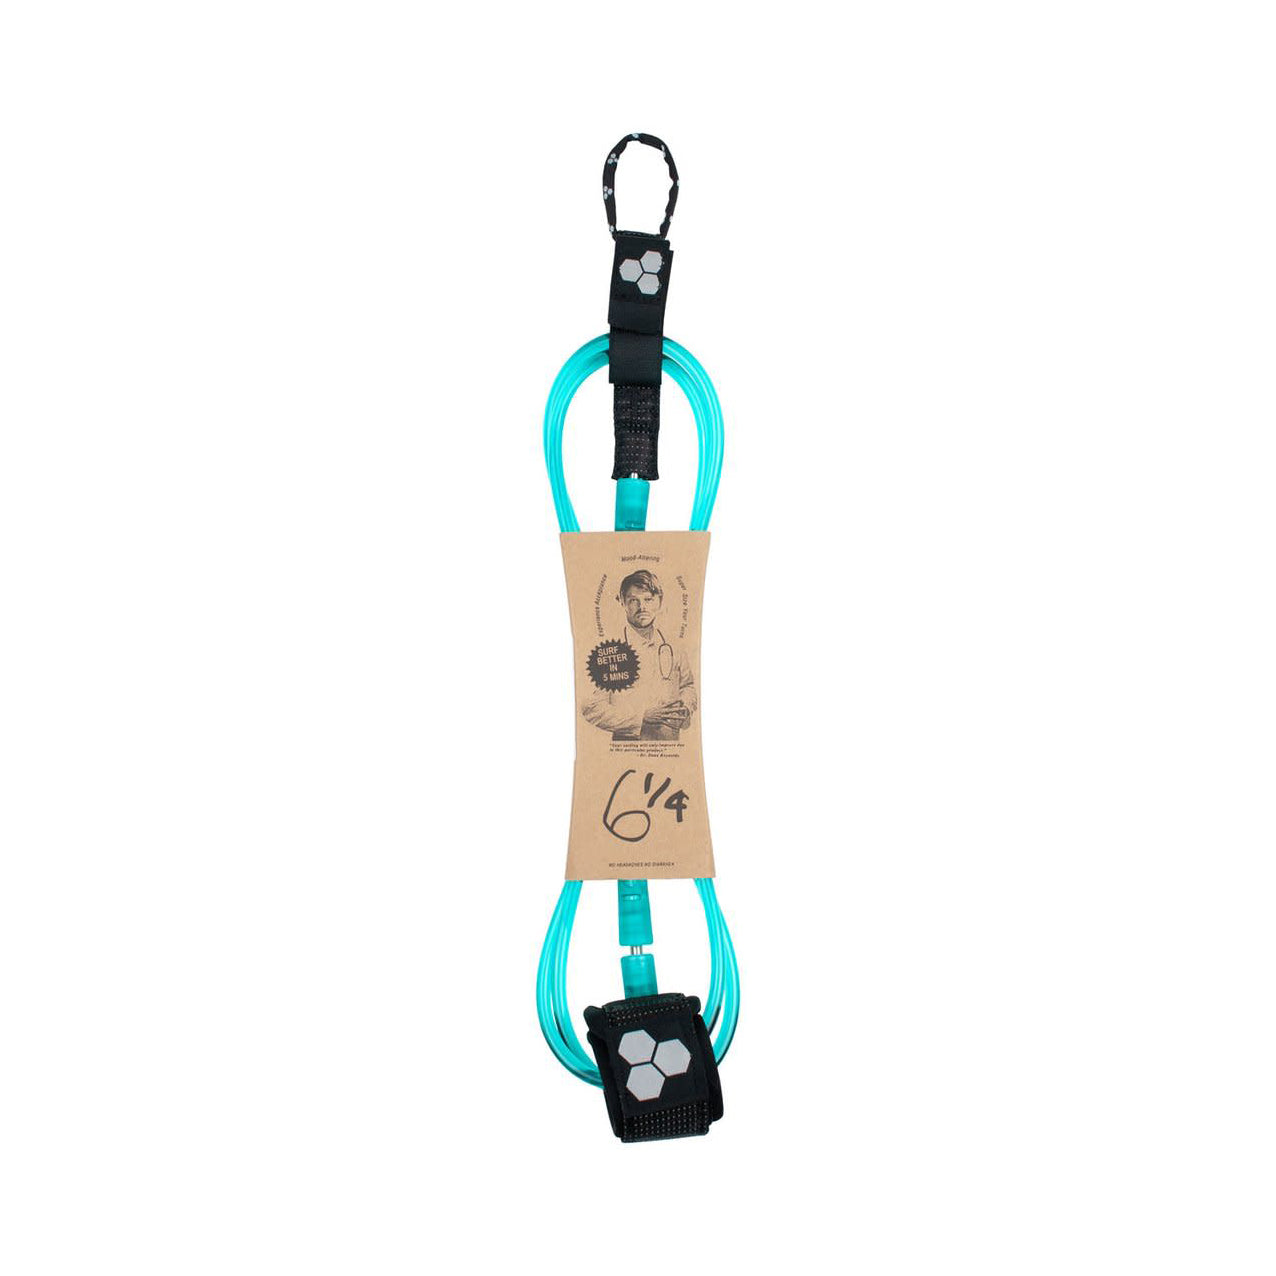 Channel Islands Surfboards Dane Reynolds Signature Standard Leash 439-Clear Turquoise 6ft0in